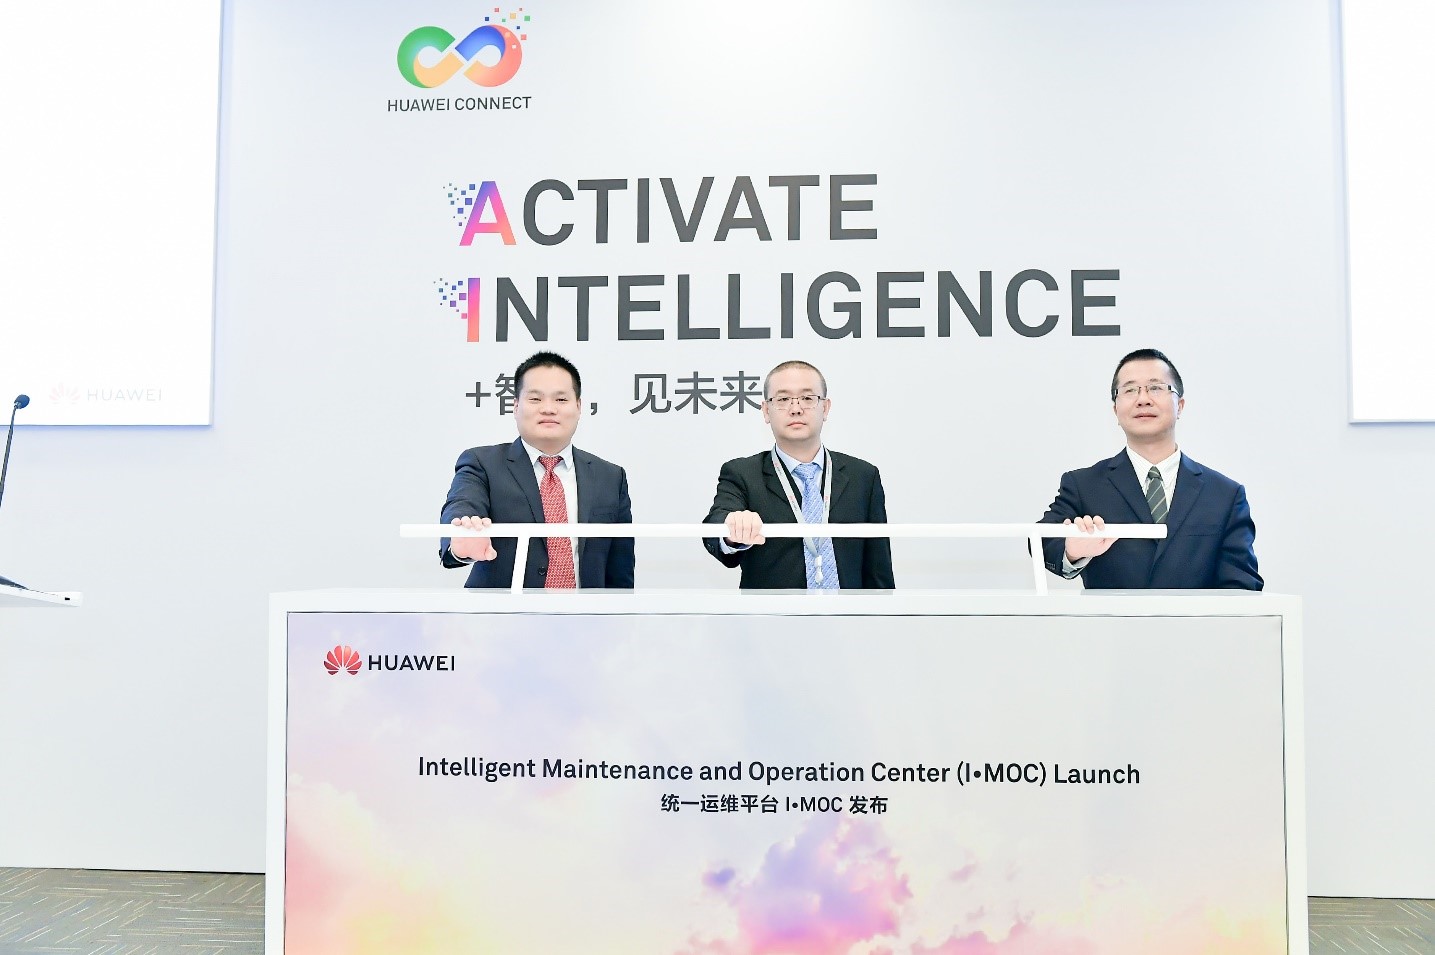 Huawei executives standing behind a desk at the launch of the Intelligent Management and Operation Center (IMOC) platform